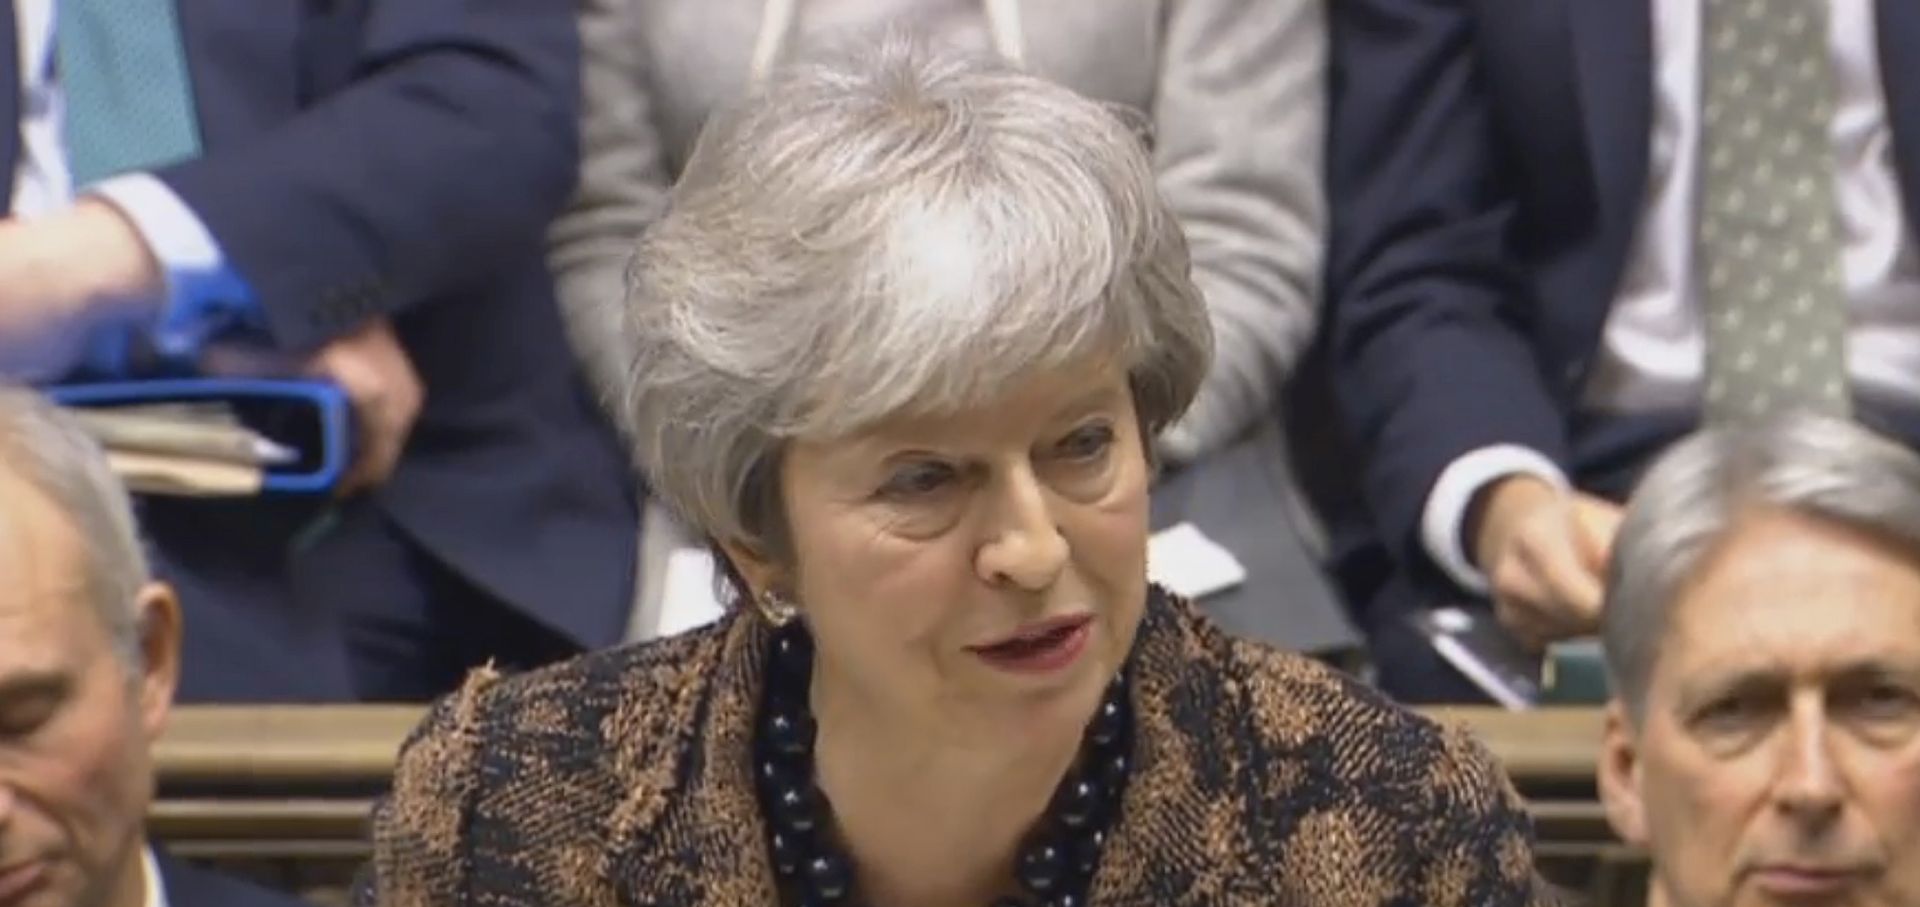 epa07306700 A handout video-grabbed still image from a video made available by UK parliament's parliamentary recording unit shows Prime Minister Theresa May addressing the MPs at the parliament 21 January 2019, London, United Kingdom. May addressed the MPs on her plans regarding Brexit after she suffered a defeat last week when MPs rejected her plans.  EPA/PARLIAMENTARY RECORDING UNIT HANDOUT MANDATORY CREDIT: PARLIAMENTARY RECORDING UNIT HANDOUT EDITORIAL USE ONLY/NO SALES